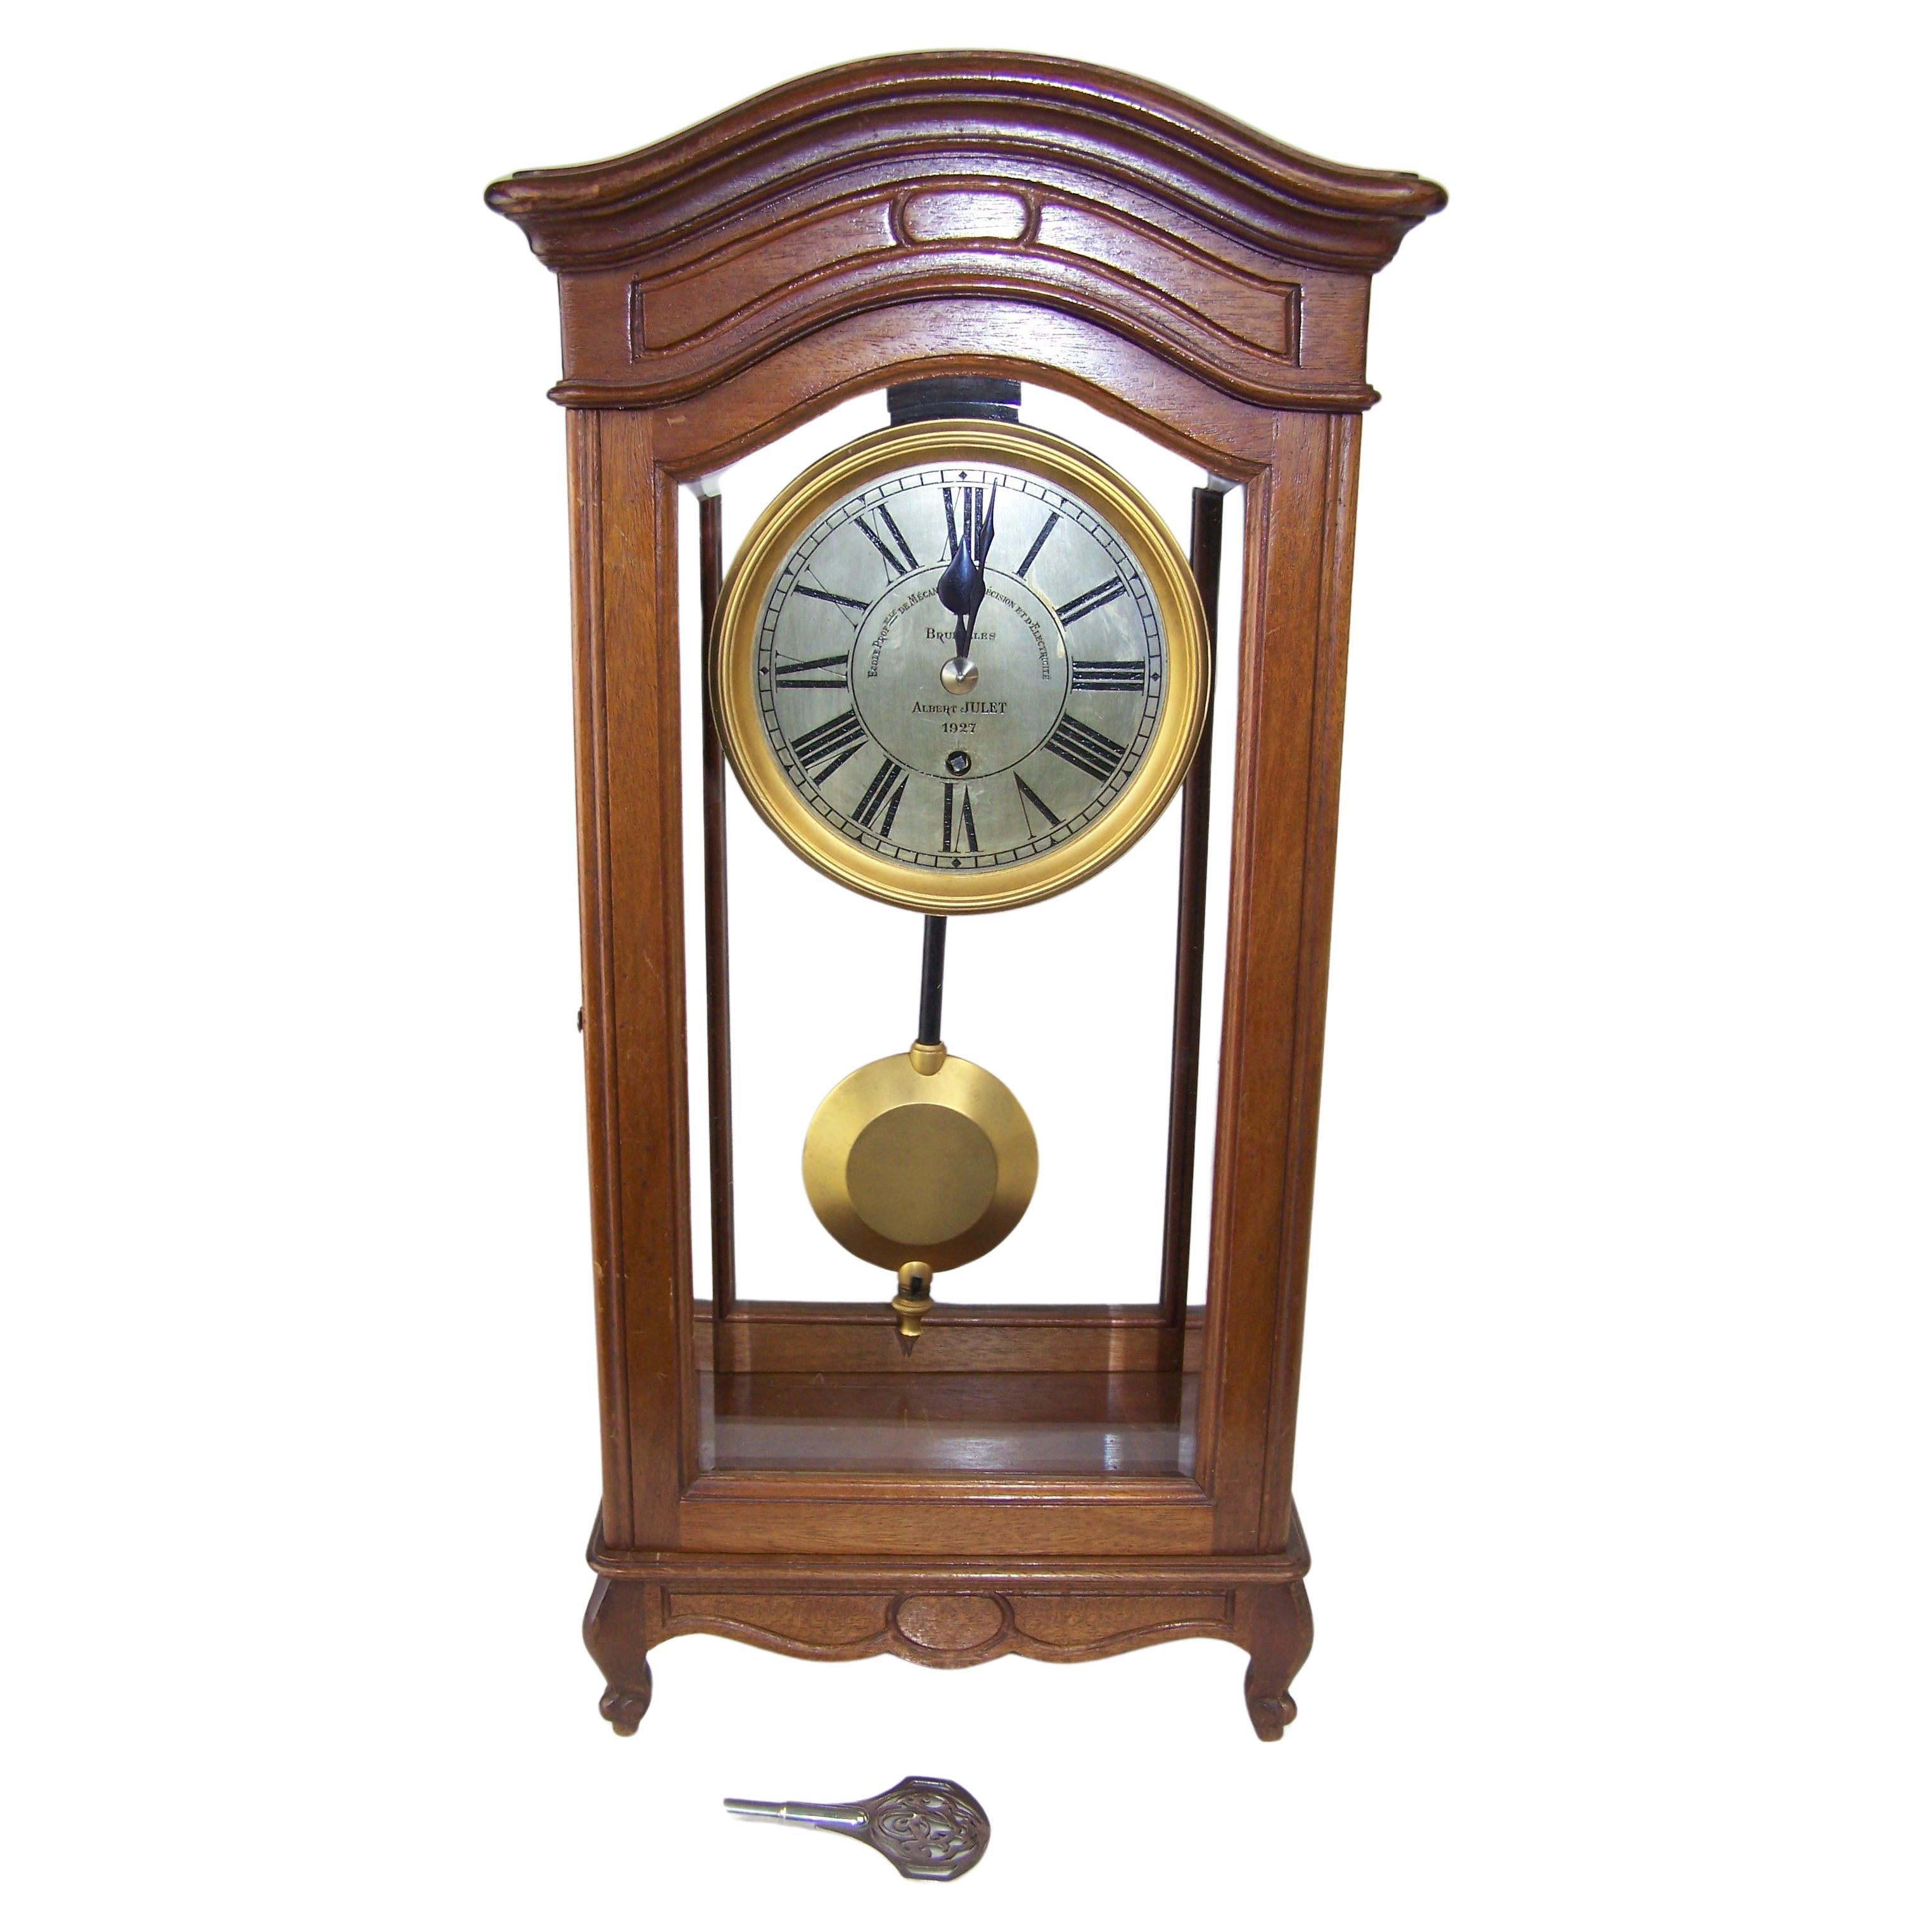 Clock from the Brussels school (1927)